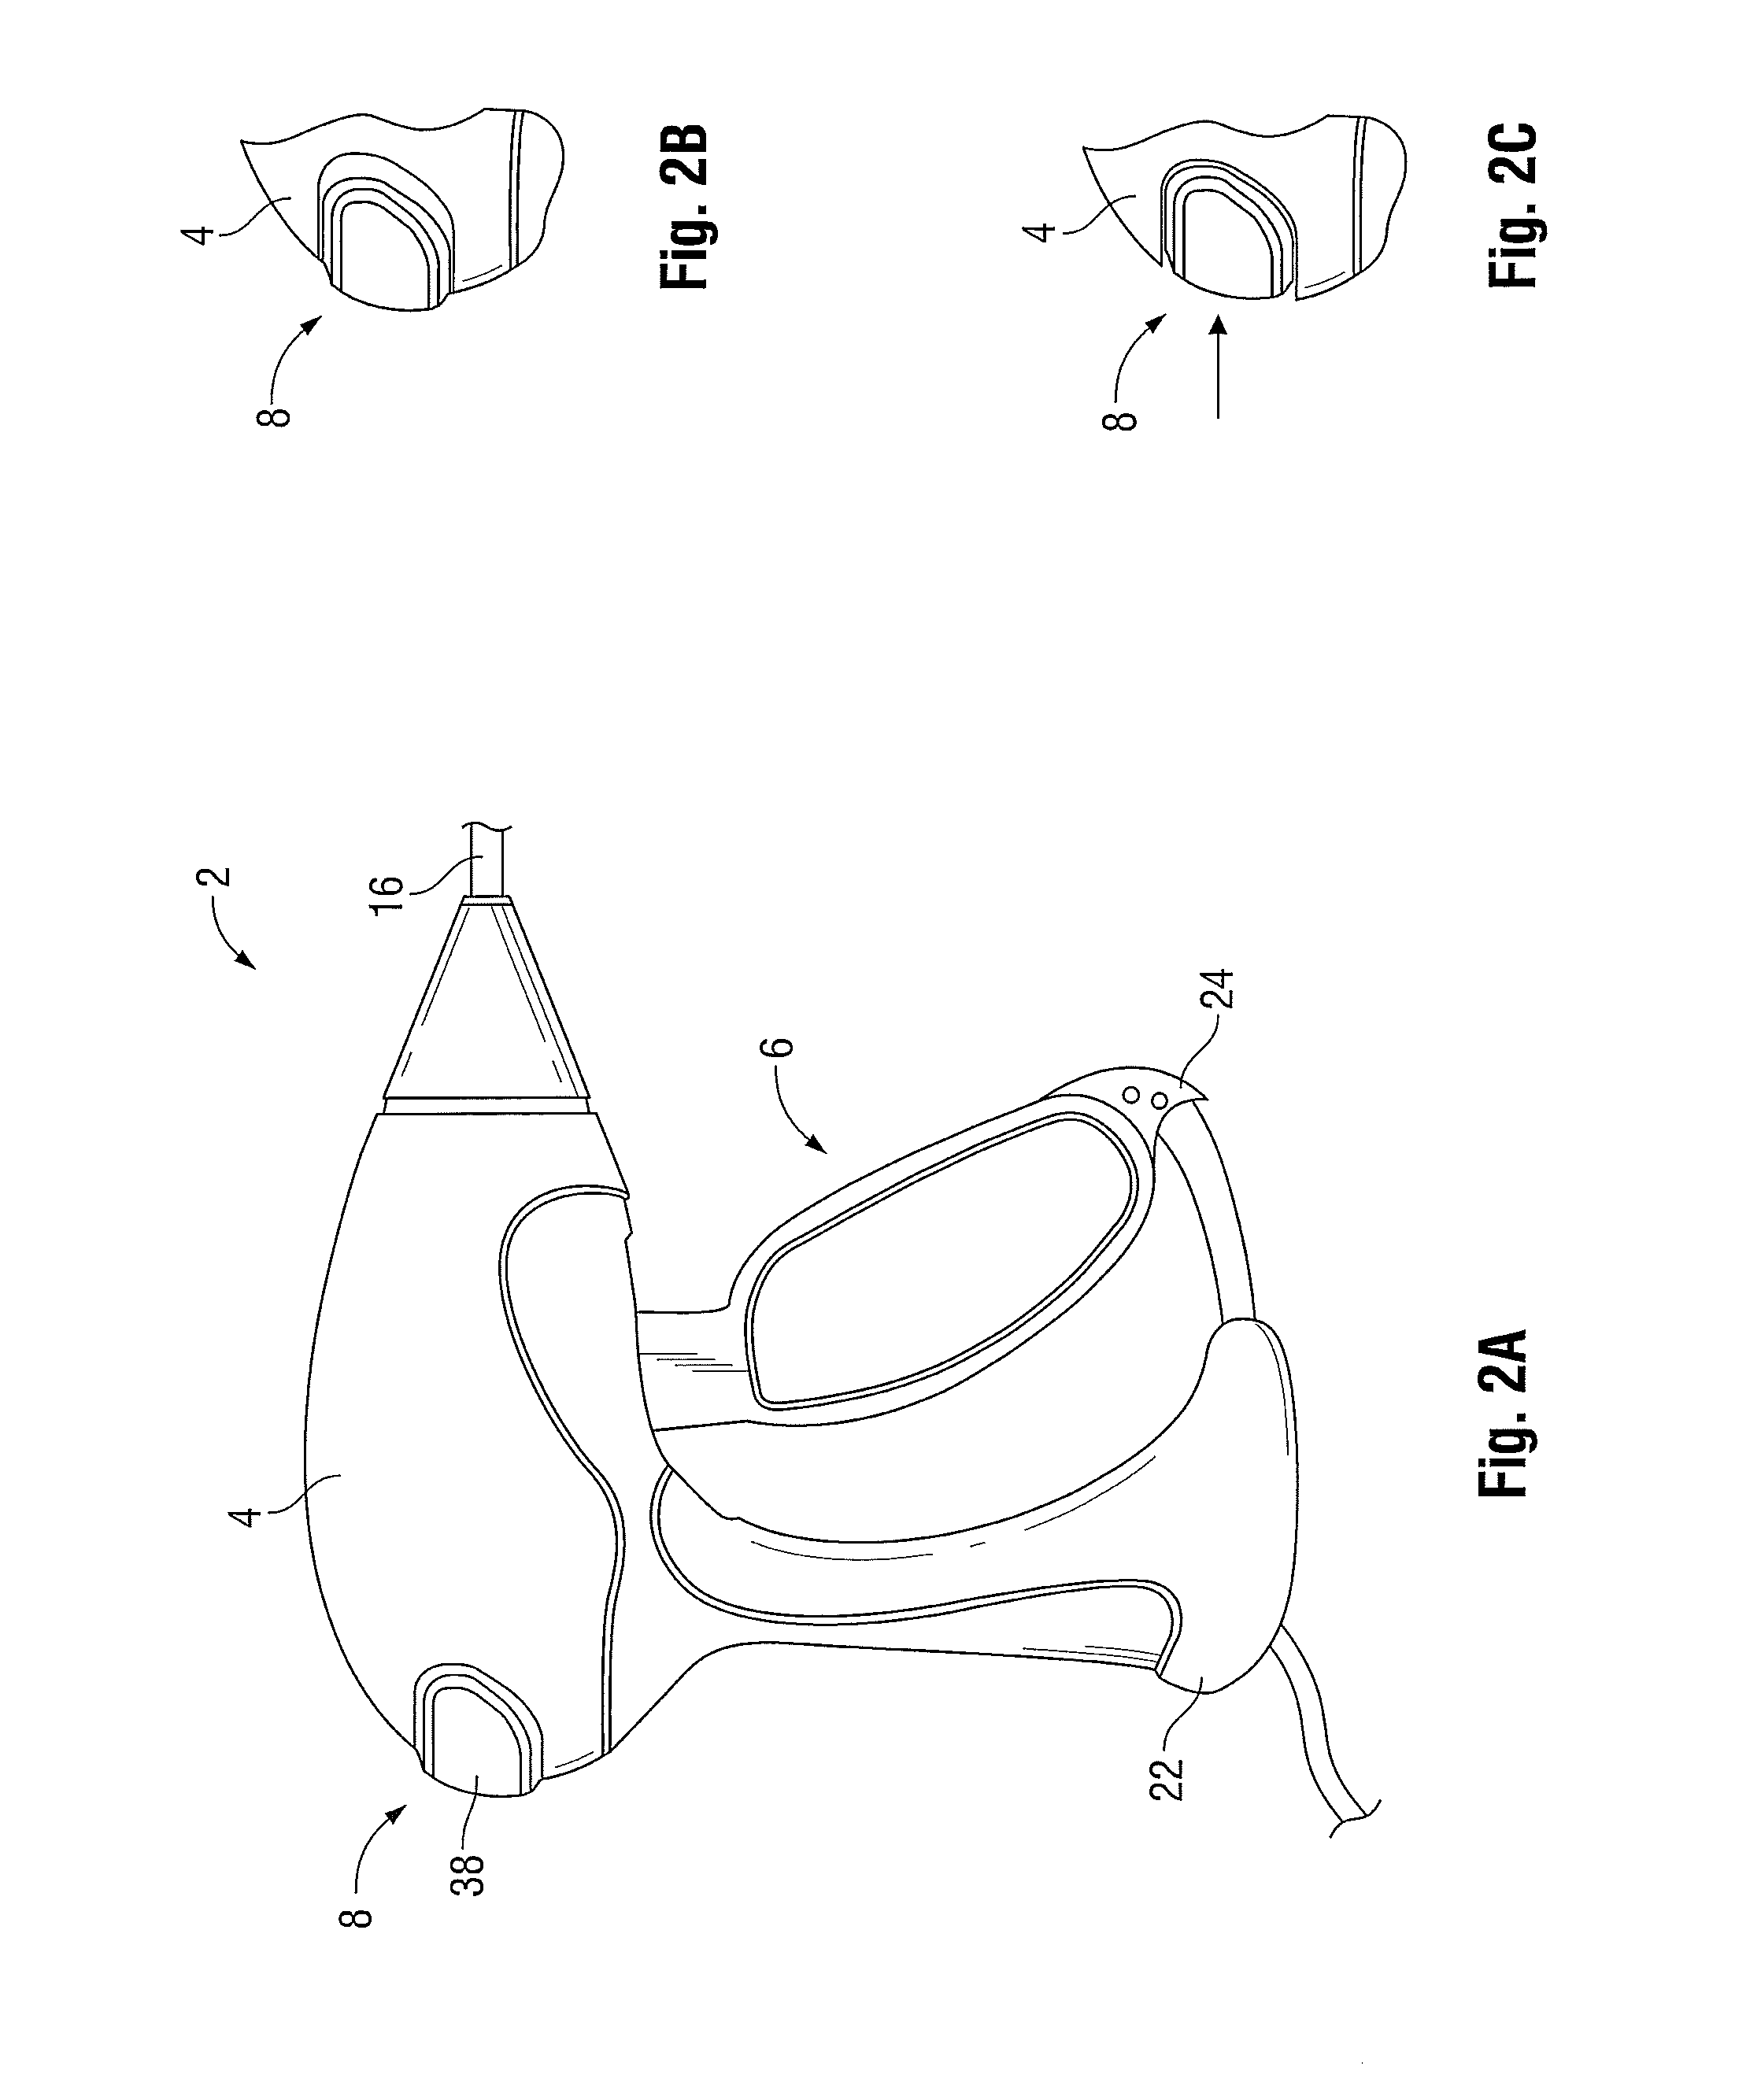 Apparatus for Activating an Electrosurgical Vessel Sealing Instrument Having an Electrical Cutting Mechanism